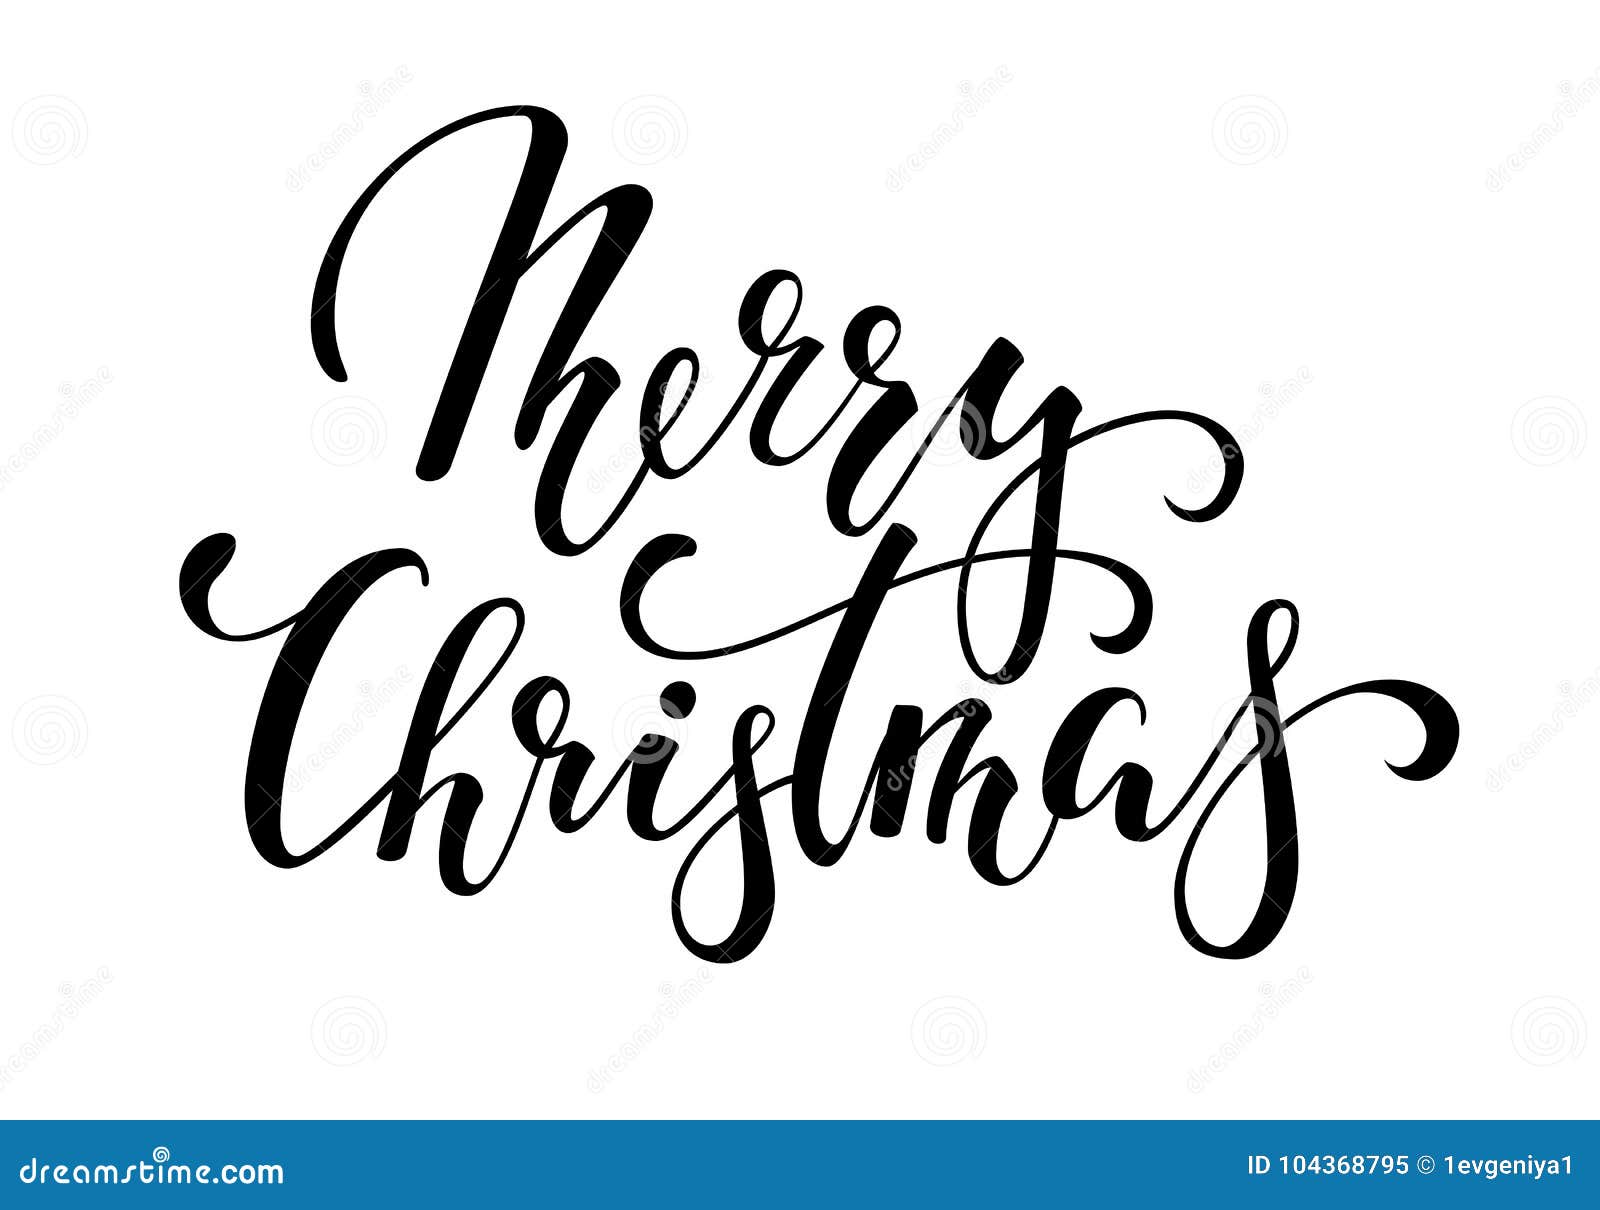 merry christmas. hand drawn creative calligraphy and brush pen lettering.  for holiday greeting cards and invitations of the